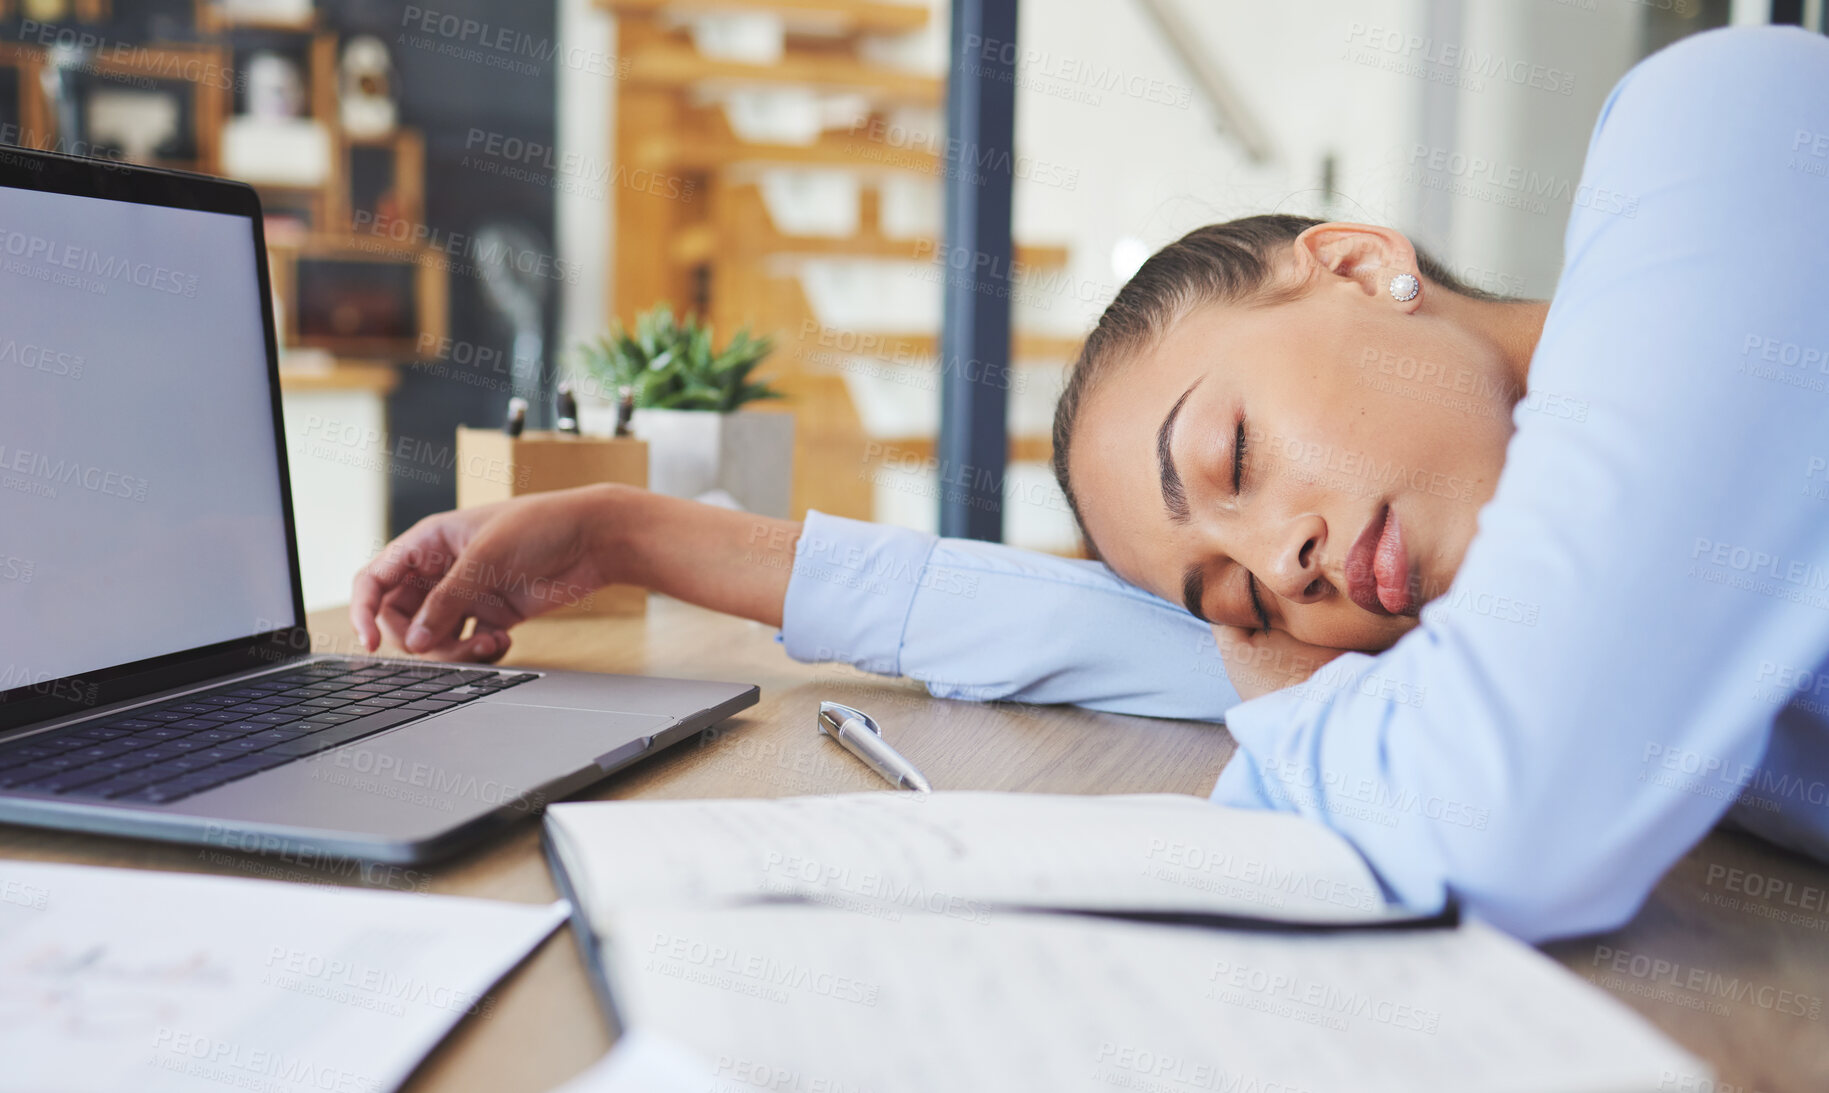 Buy stock photo Tired, exhausted and business woman sleeping at her desk while working in a modern office. Burnout, sleepy and professional corporate employee taking a nap while planning a project at her workplace.